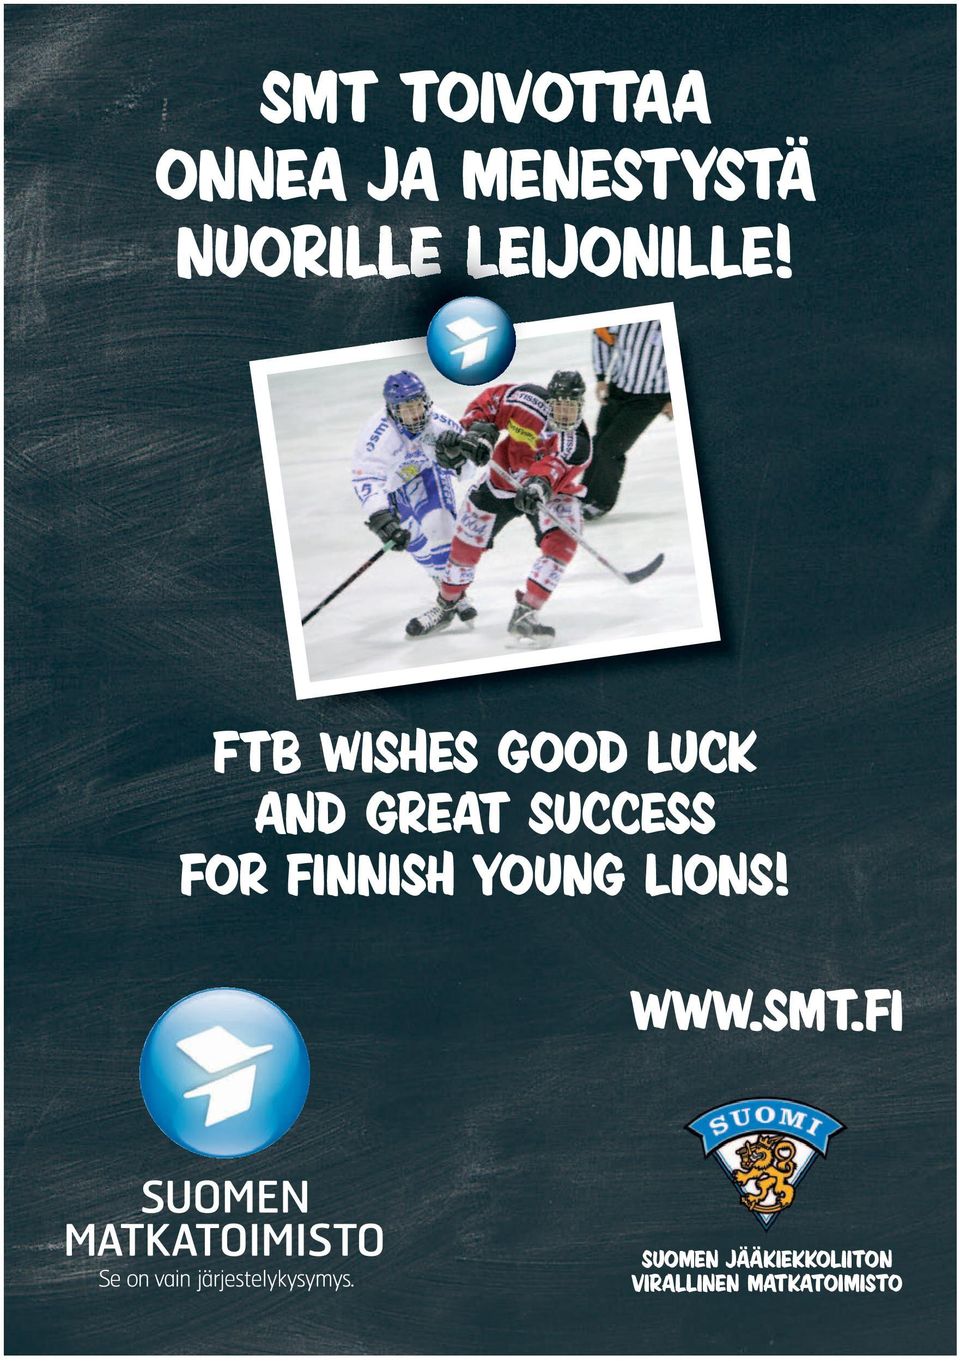 FTB wishes good luck and great success for